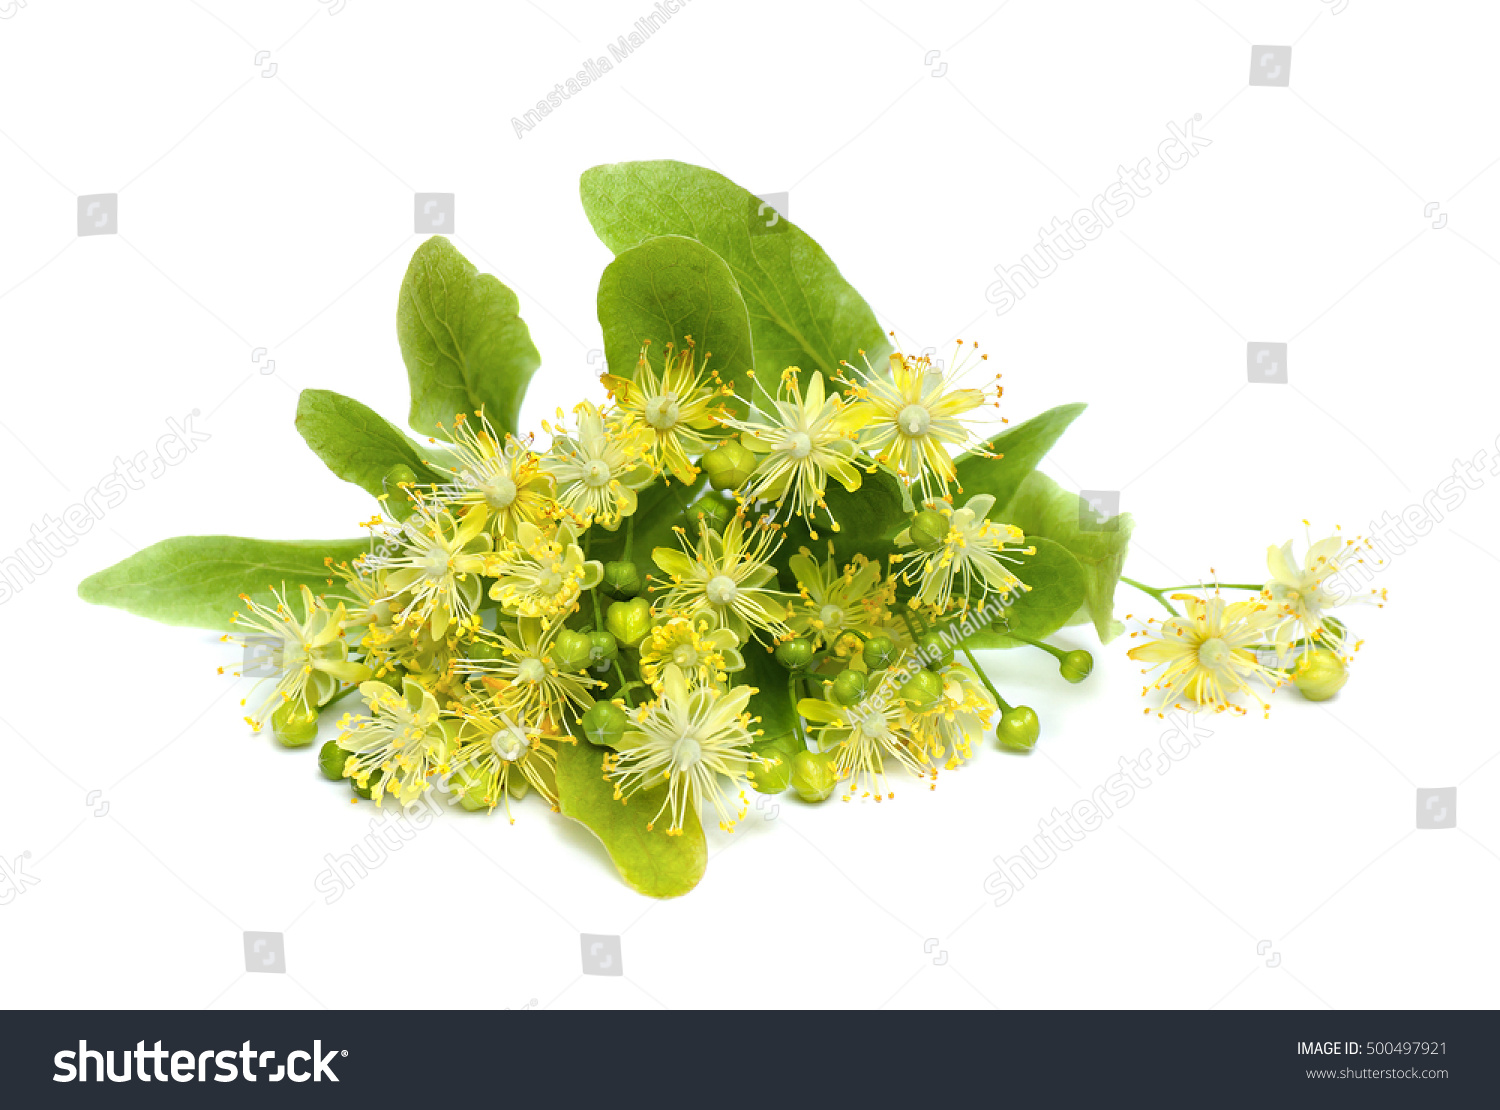 Bloom with bract Tilia (Other names: linden, basswood) on a white background #500497921